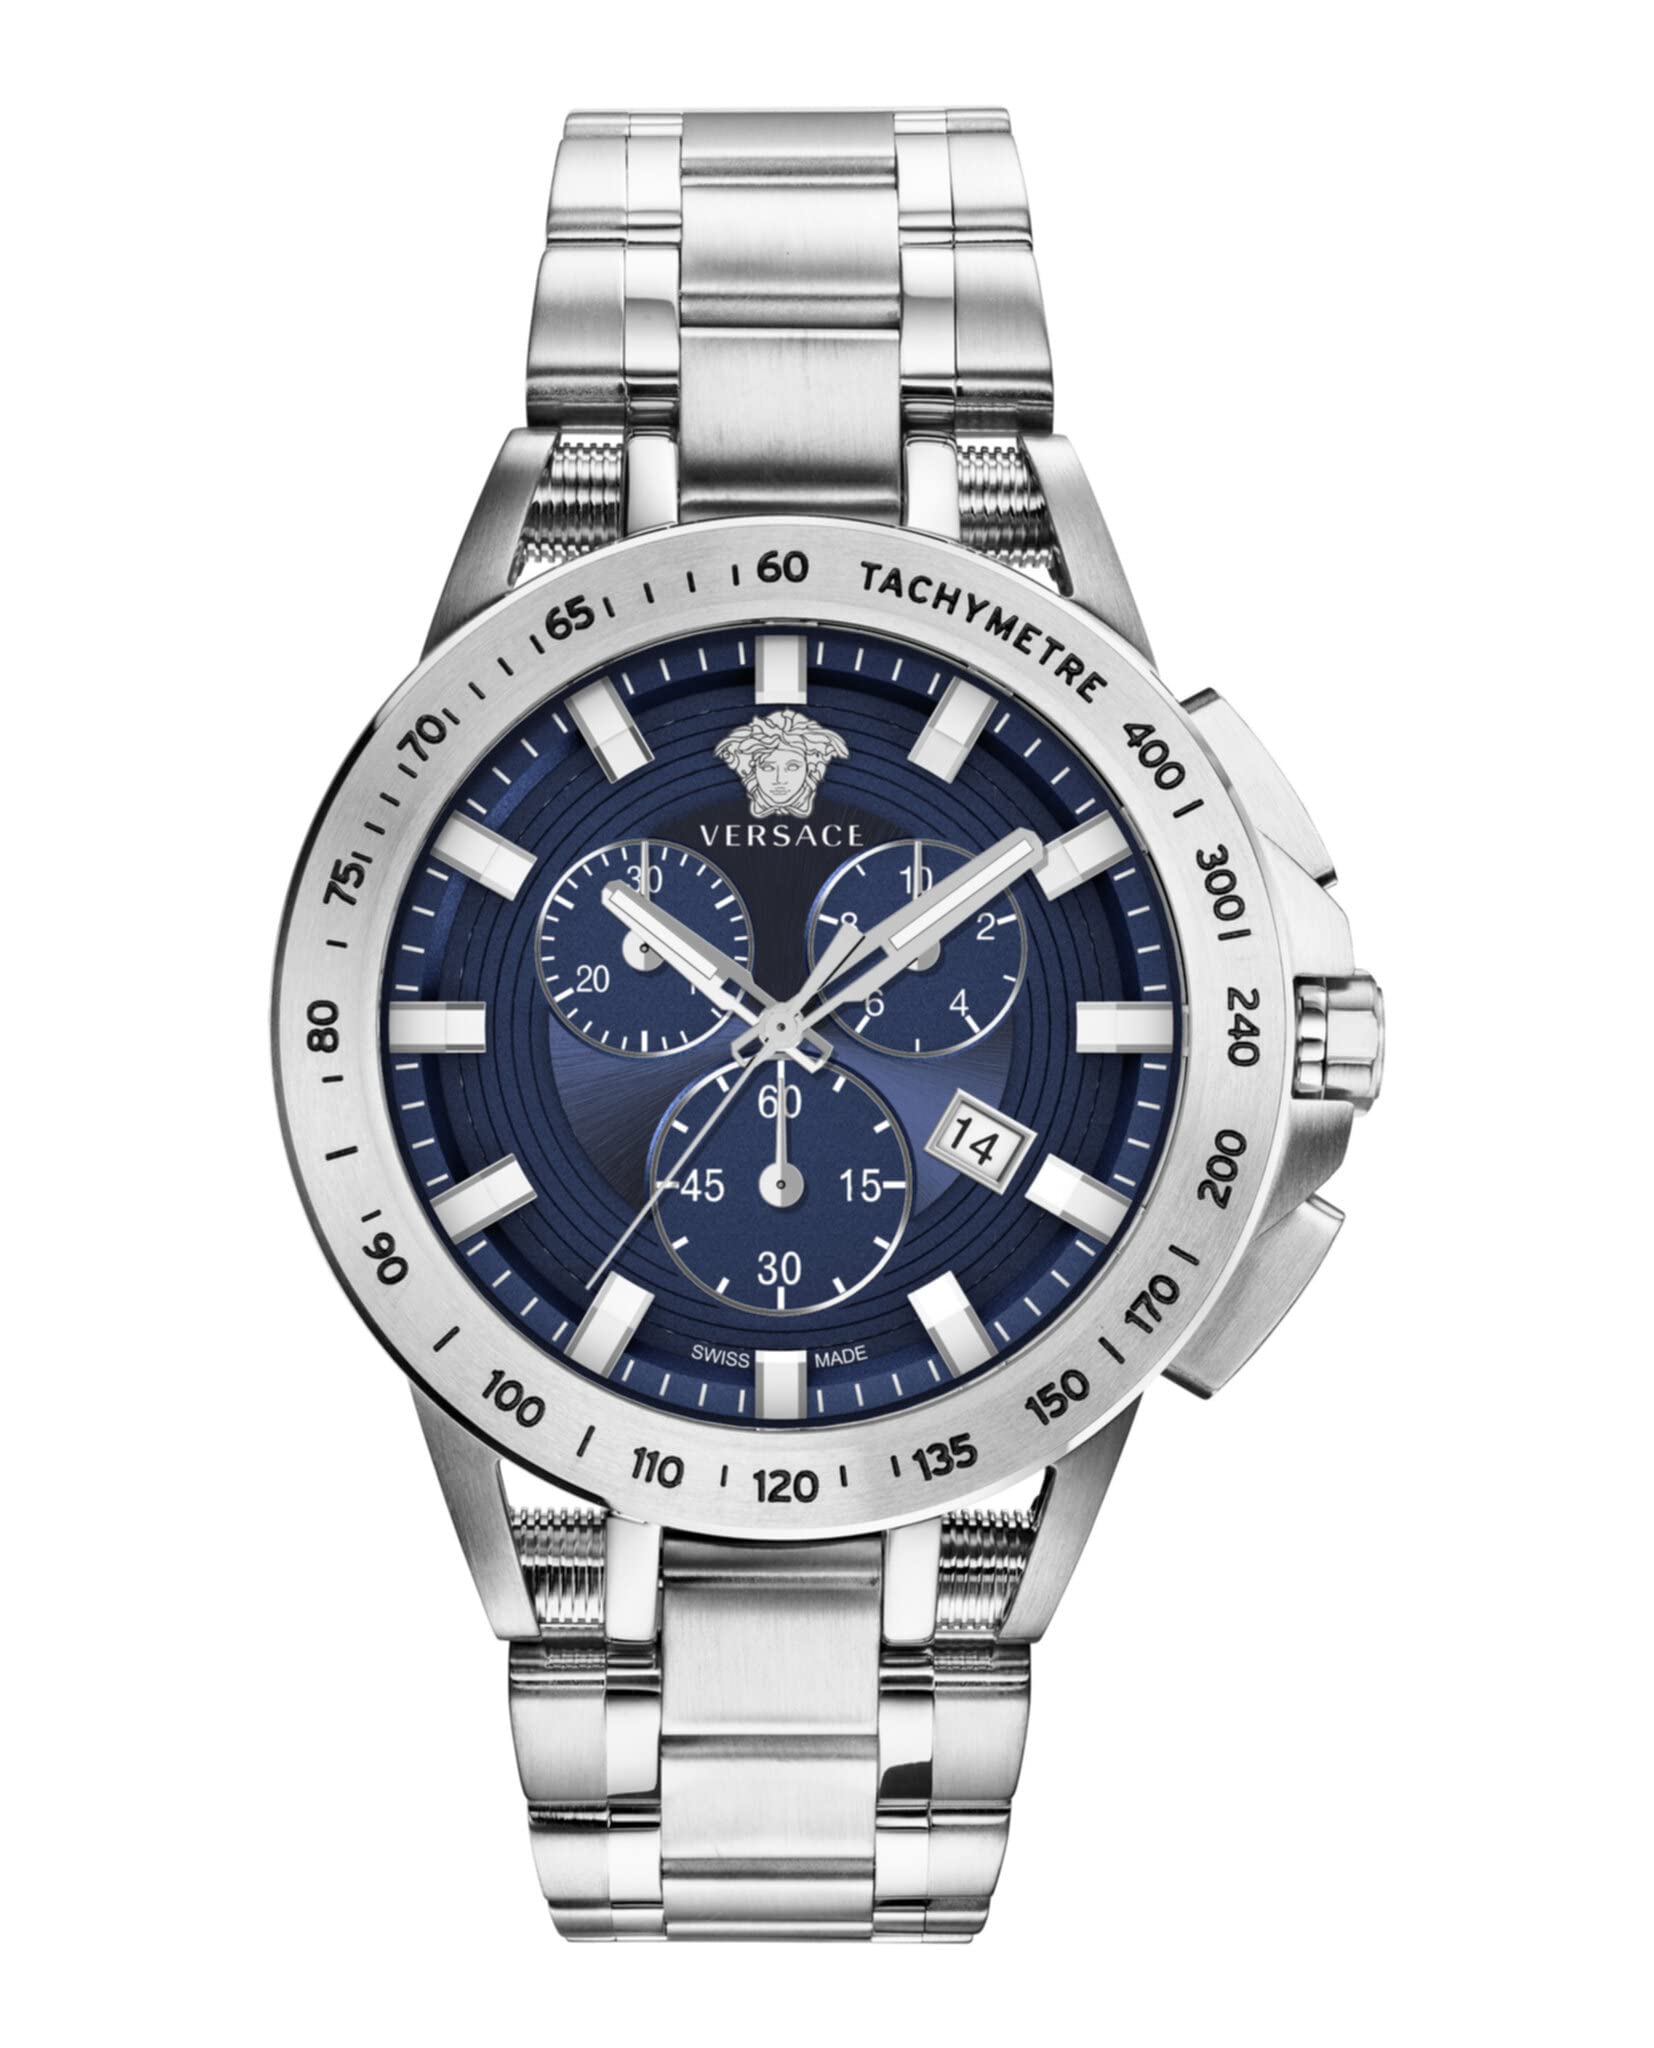 Versace Sport Tech Collection Luxury Mens Watch Timepiece with a Silver Bracelet Featuring a Stainless Steel Case and Blue Dial